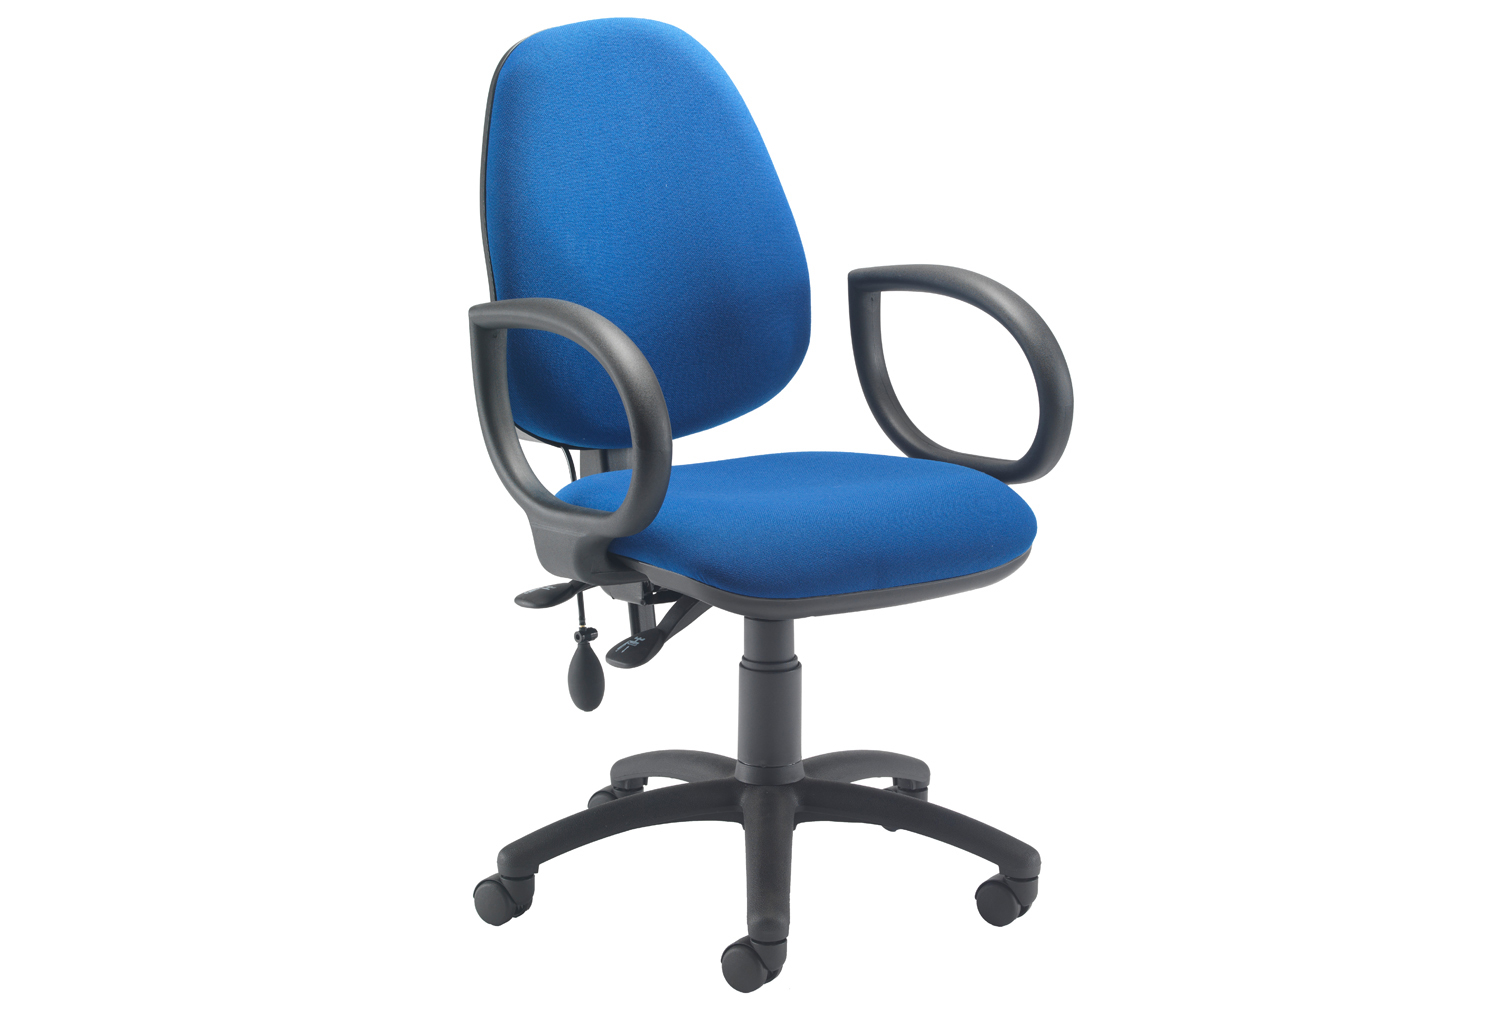 Orchid Lumbar Pump Ergonomic Operator Office Chair With Fixed Arms, Blue, Fully Installed